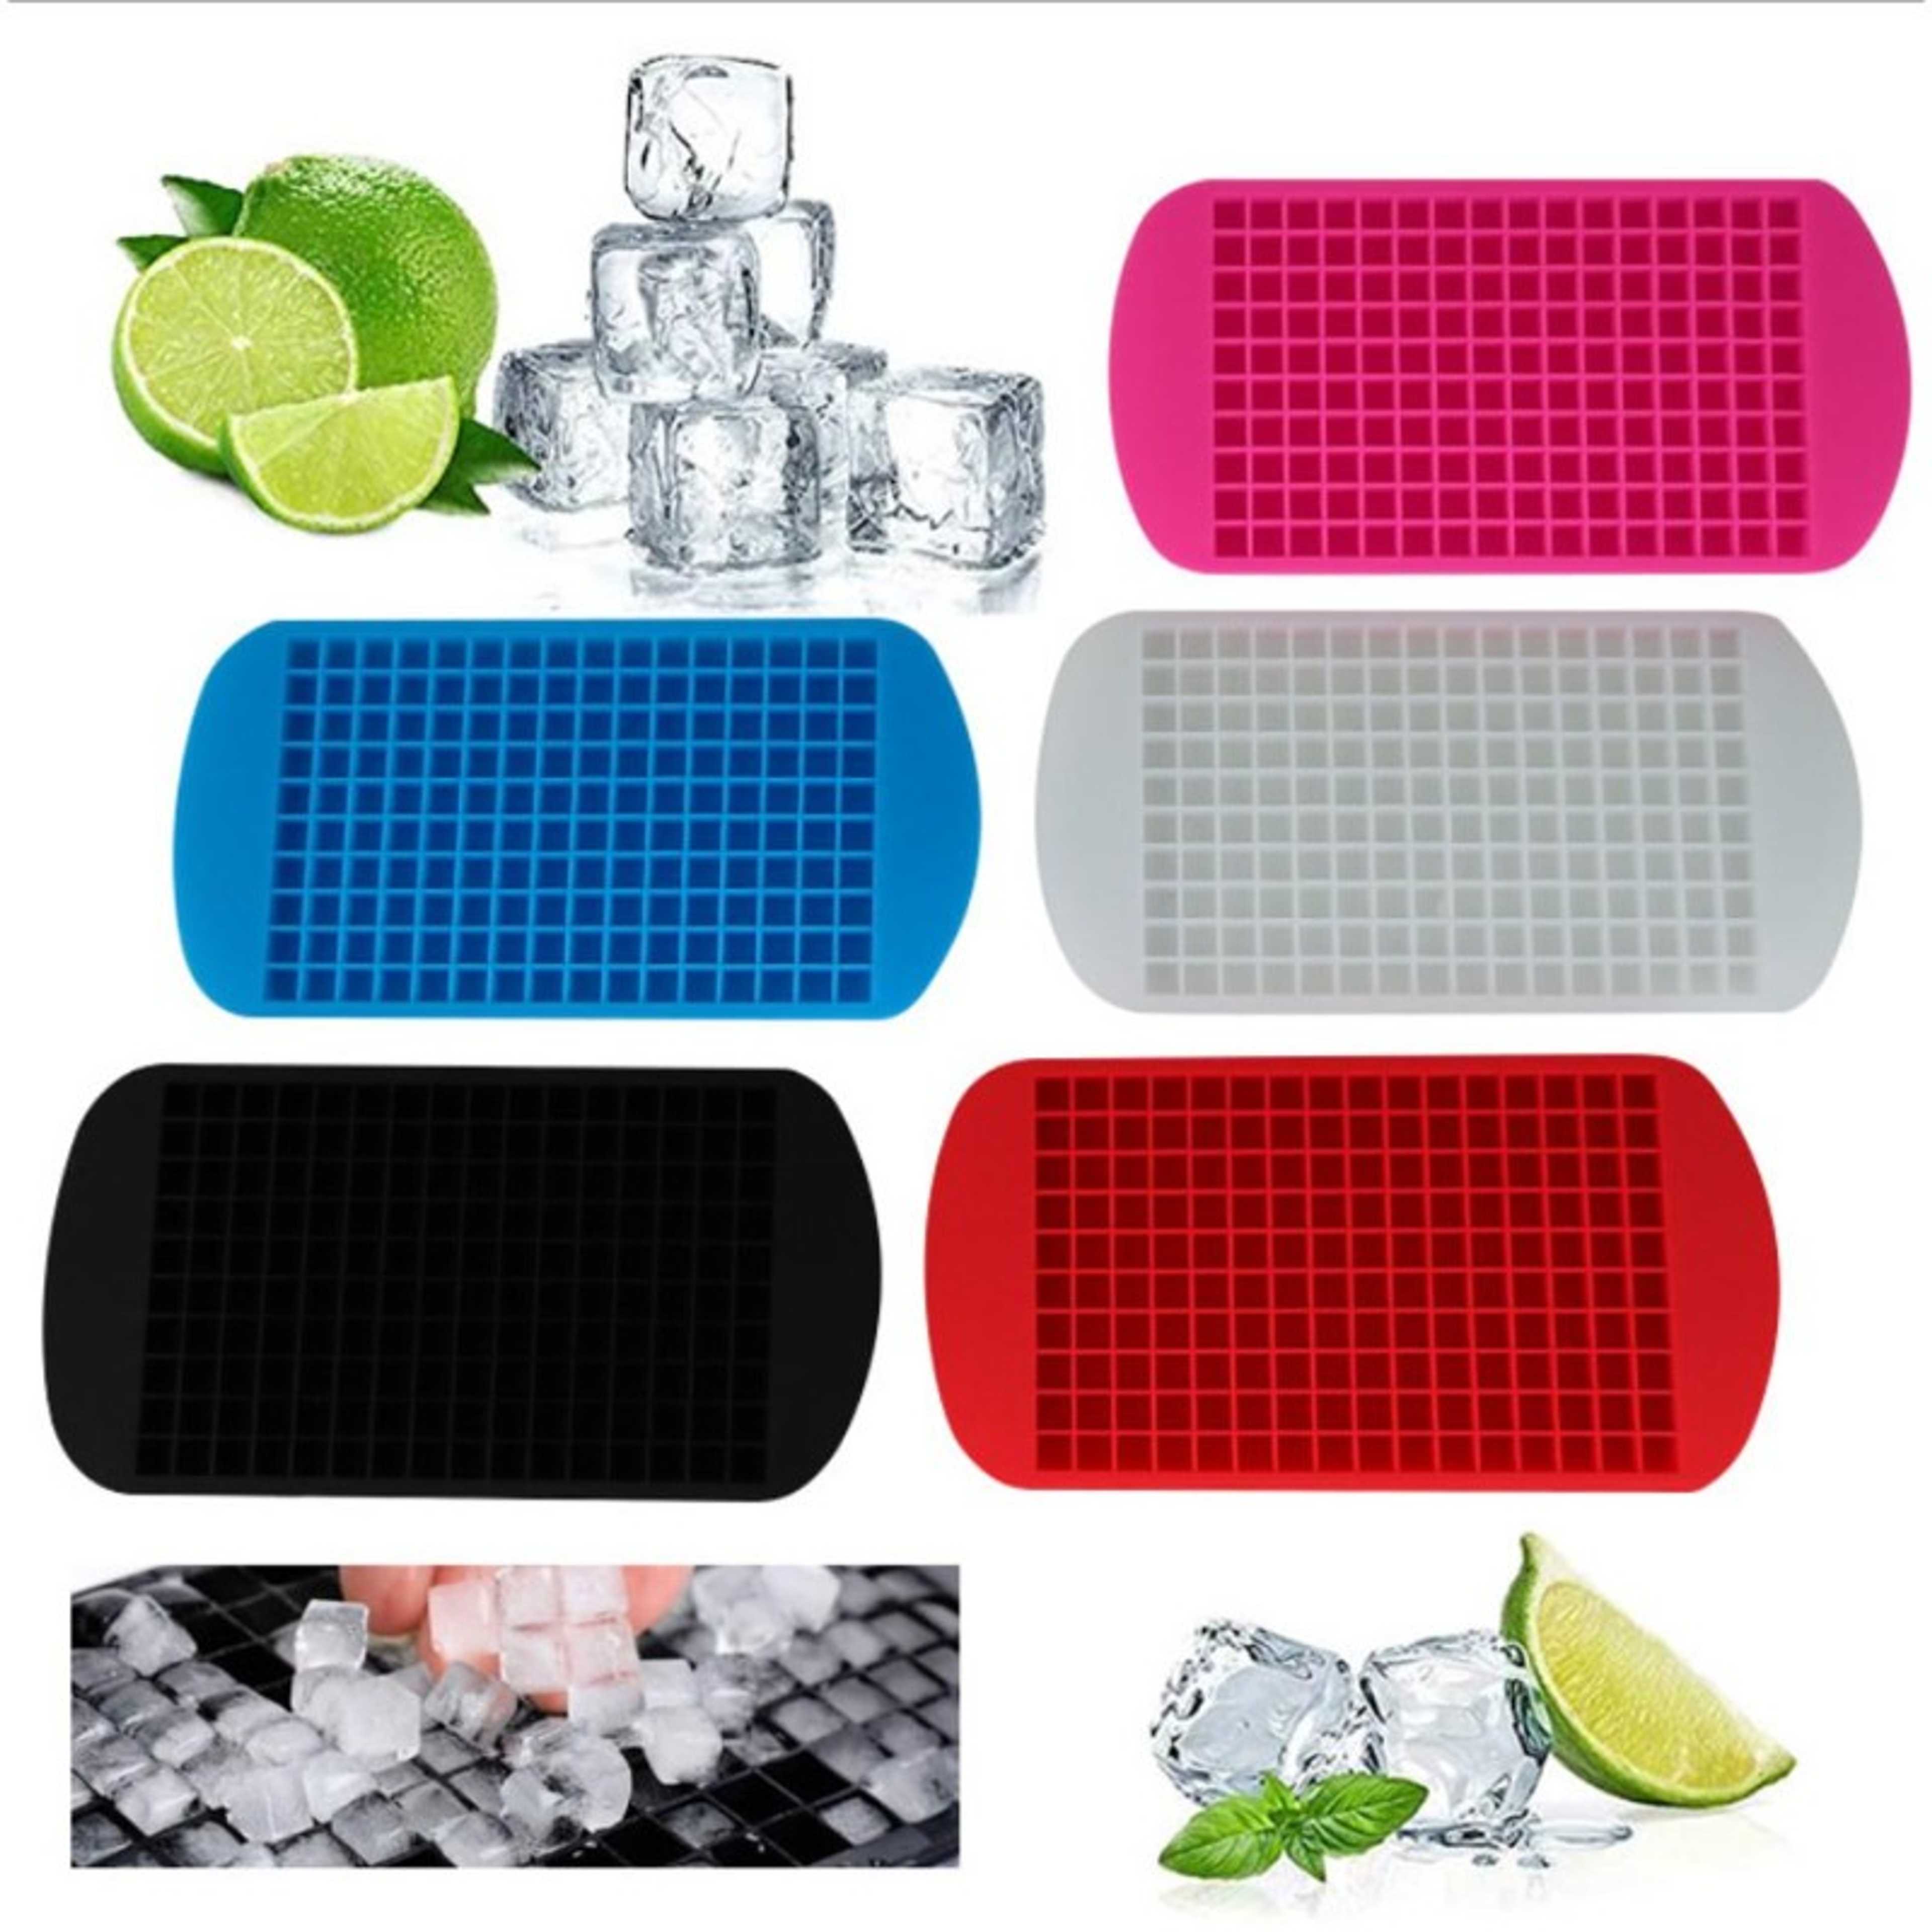 Silicone Ice Cube Mold Tray 160 Grids Square Mould Ice Cube Ball Maker DIY Mold Creek al badar store